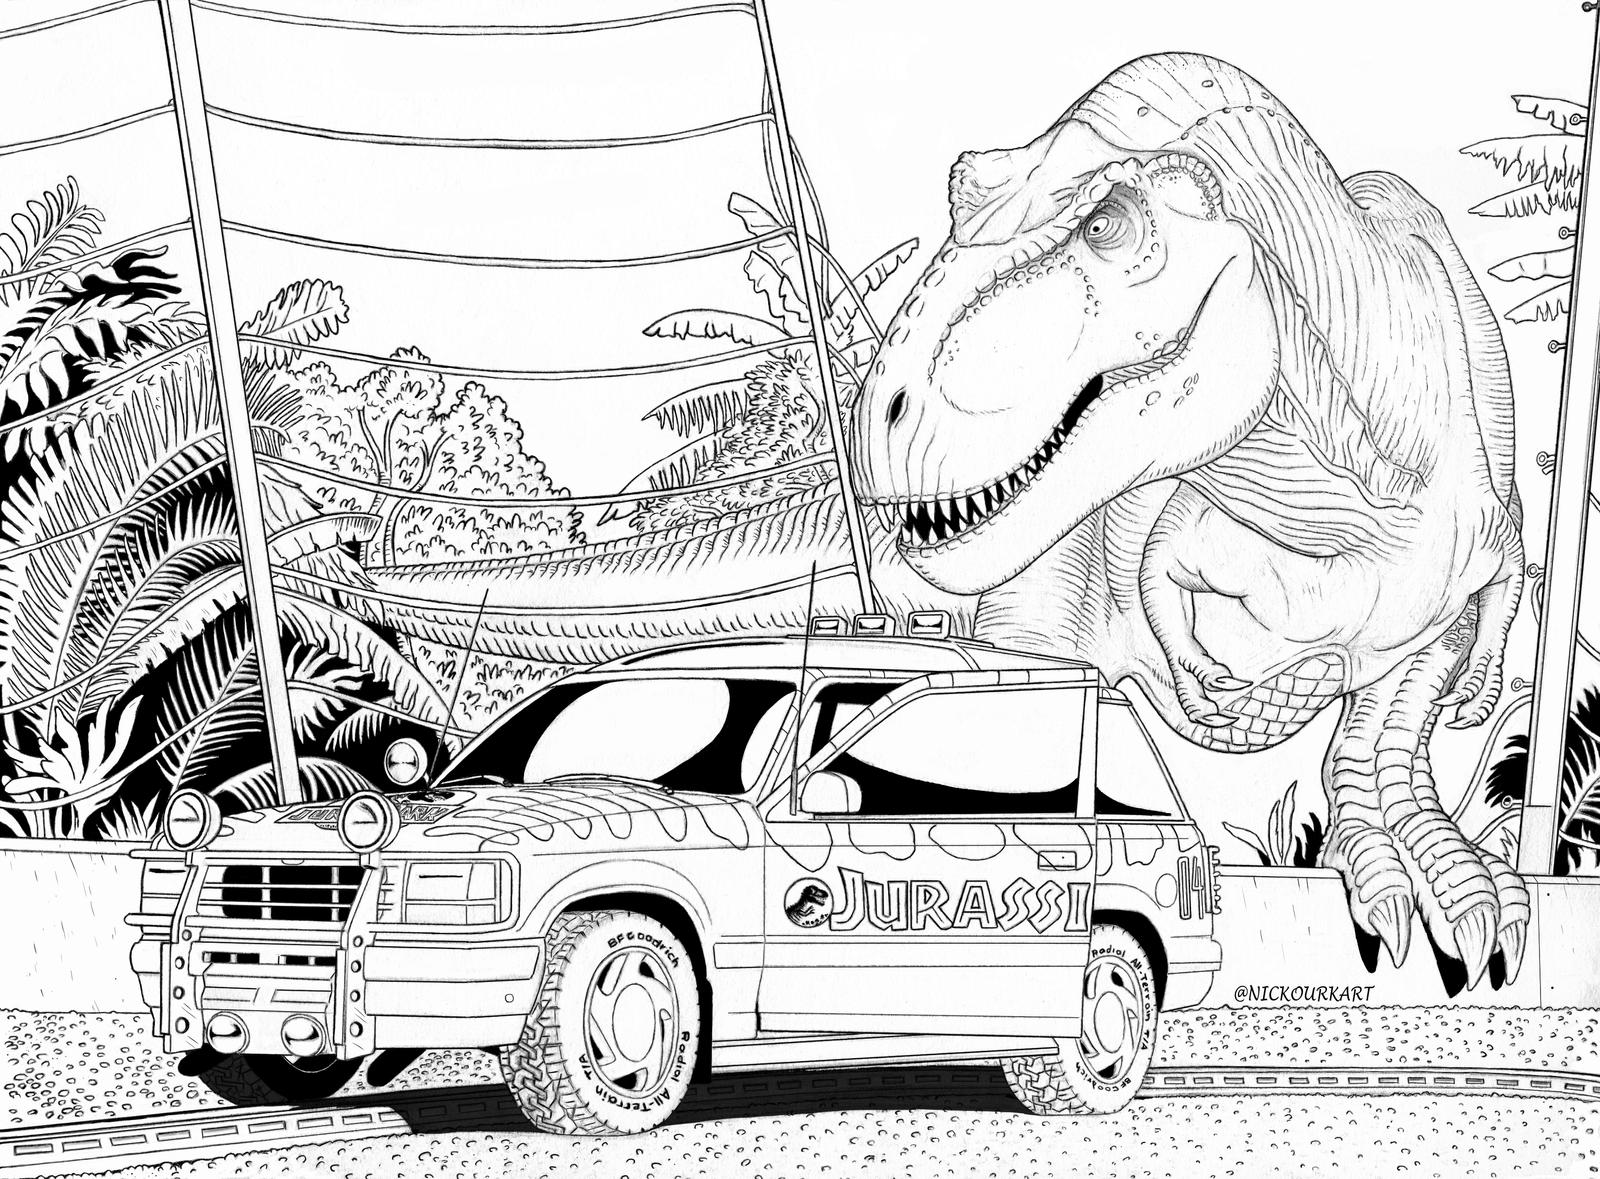 Jurassic Park TRex breakout Coloring page by NKourk on DeviantArt